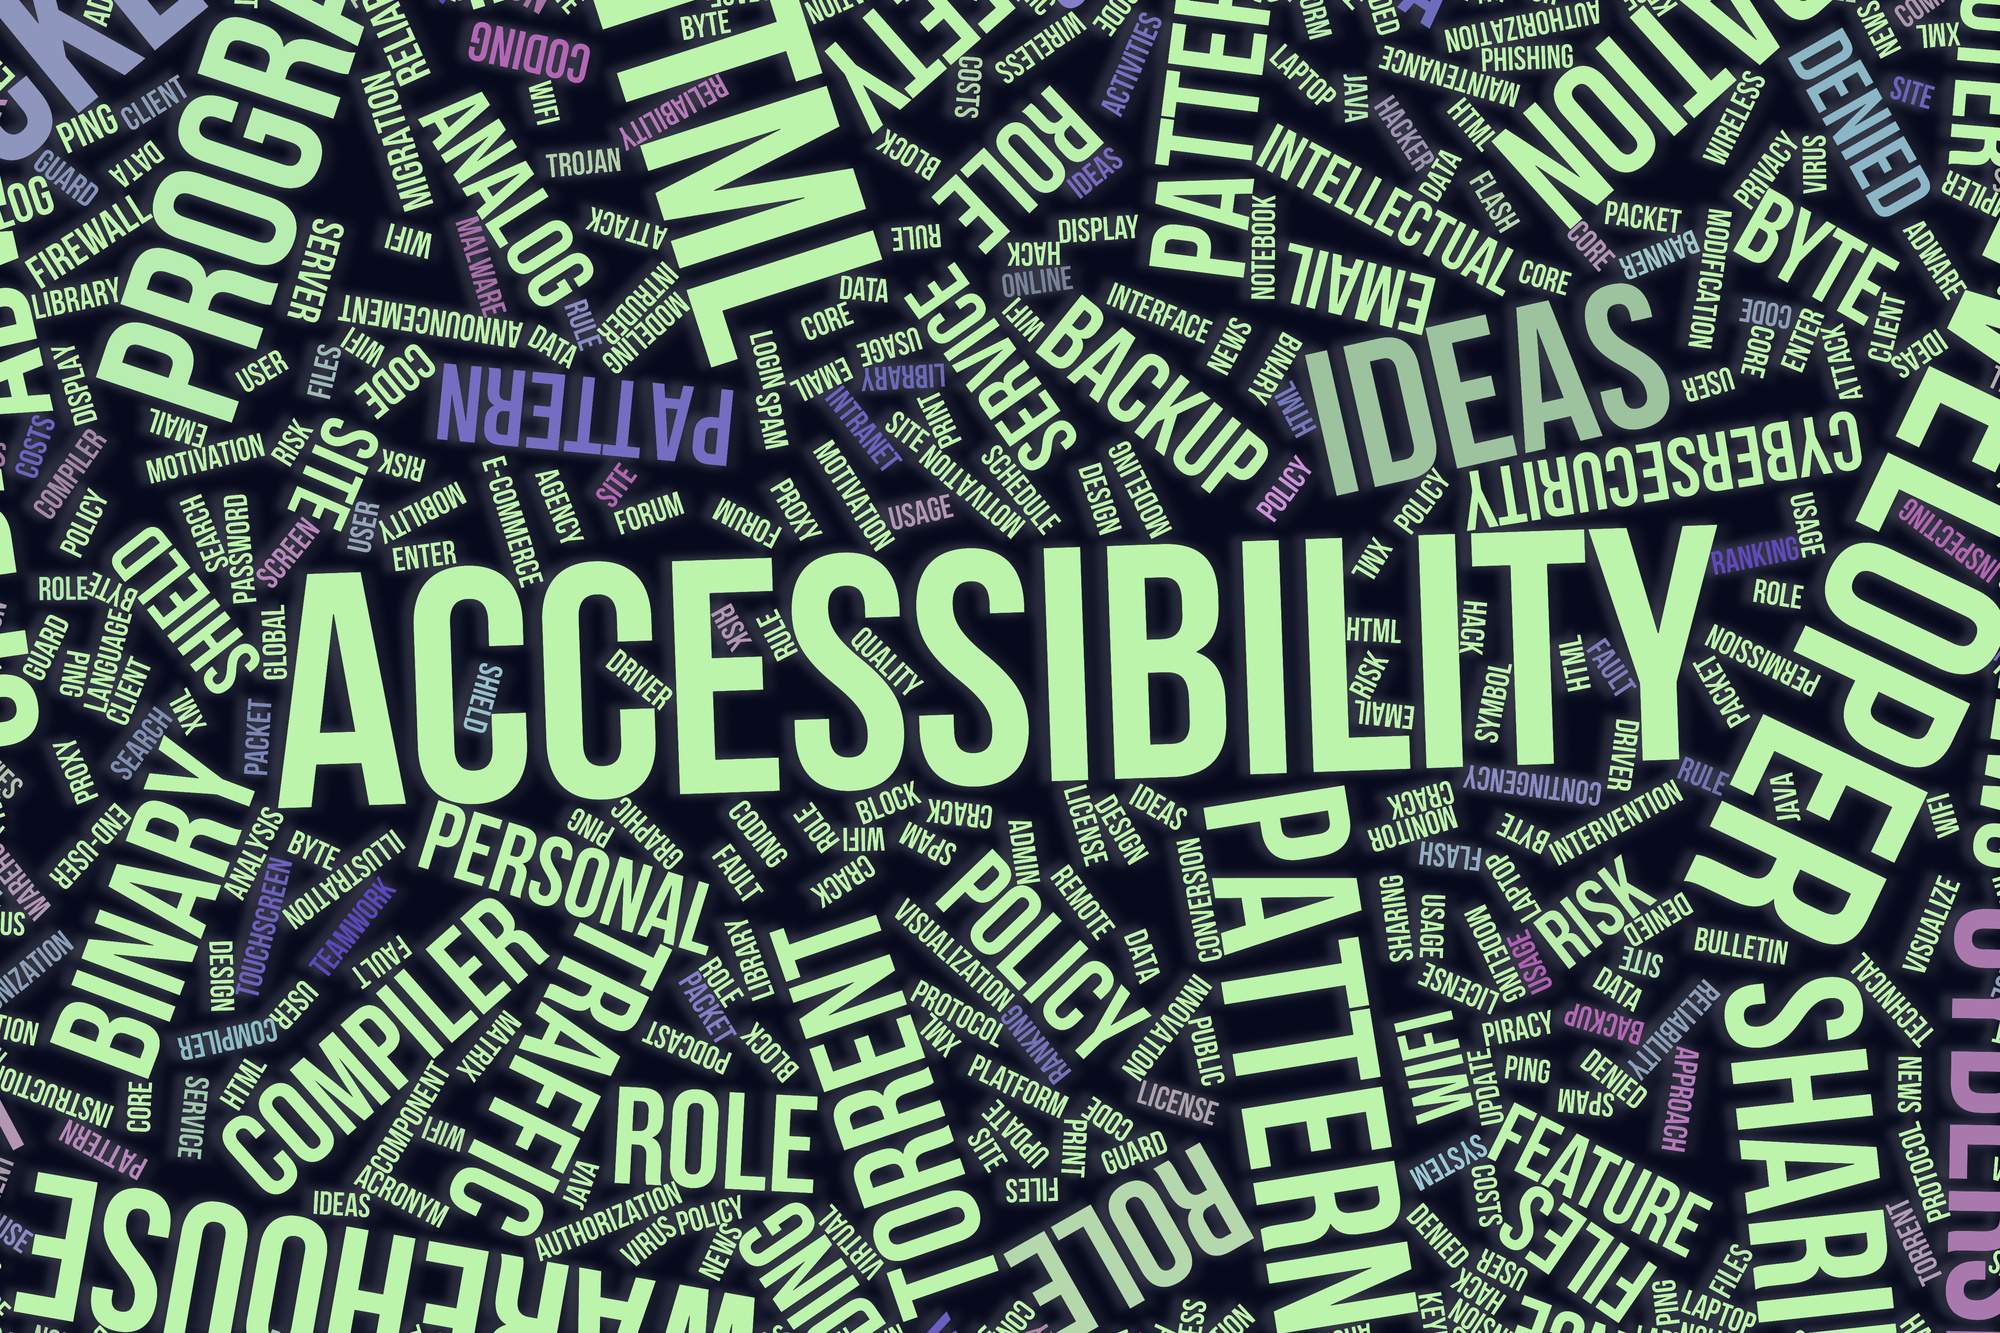 How to Make Accessible Content for Everyone